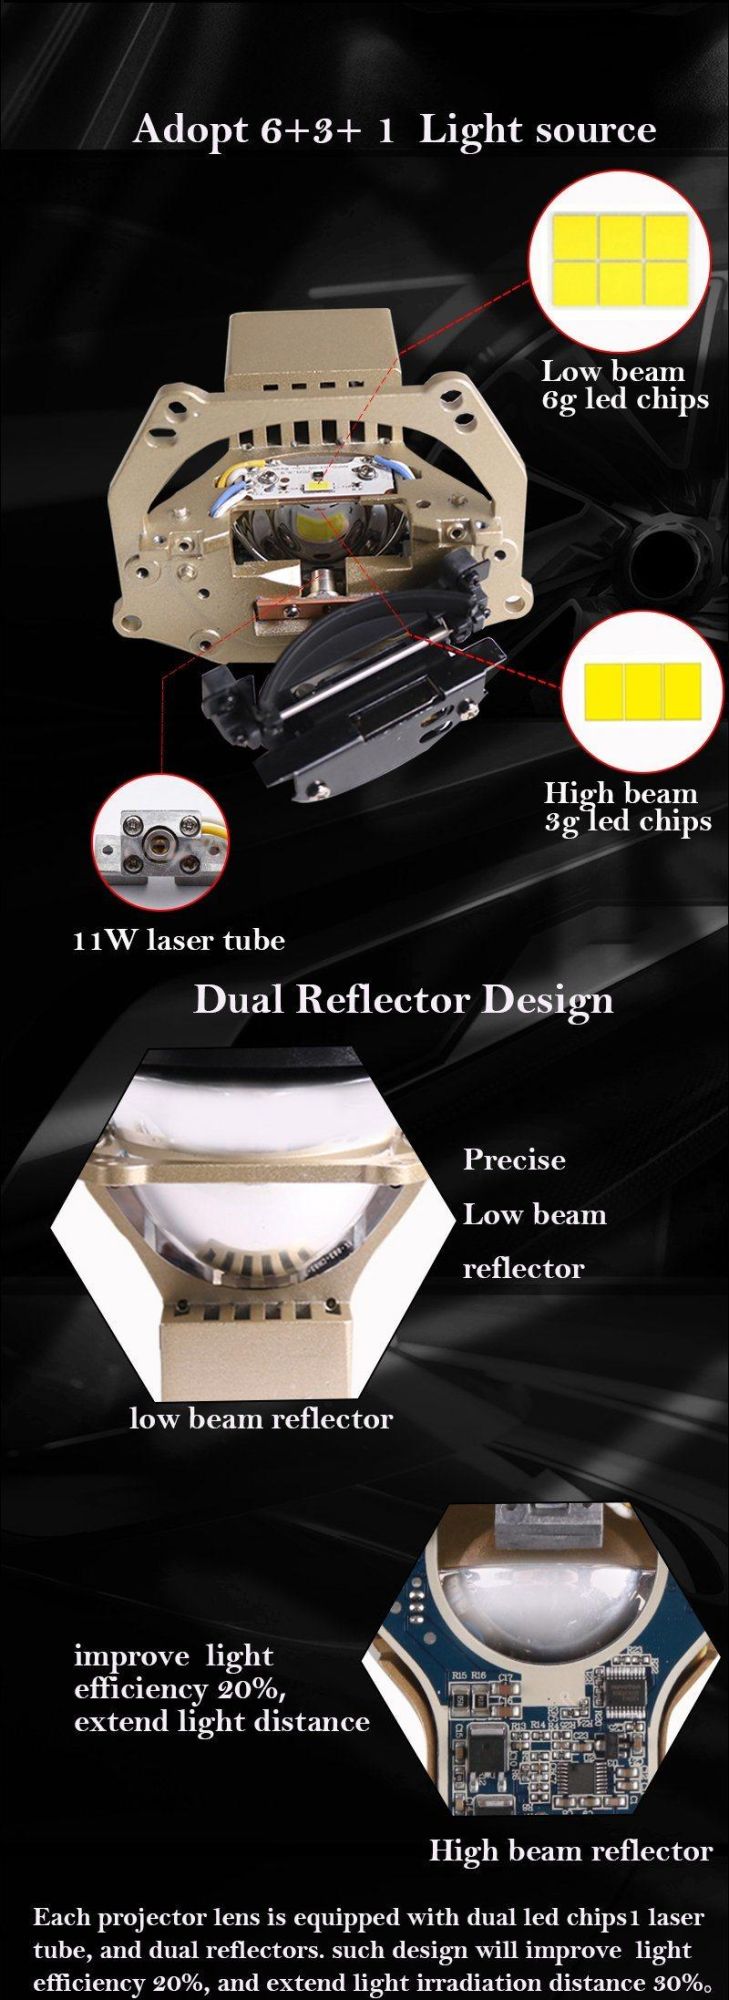 The Best Auto Headlight High Quality Power Super Bright 3 Inch A8l Bi LED Laser Projector Lens Headlight 58W 6000K Aff Fit for Car Truck Bus Motor Headlight